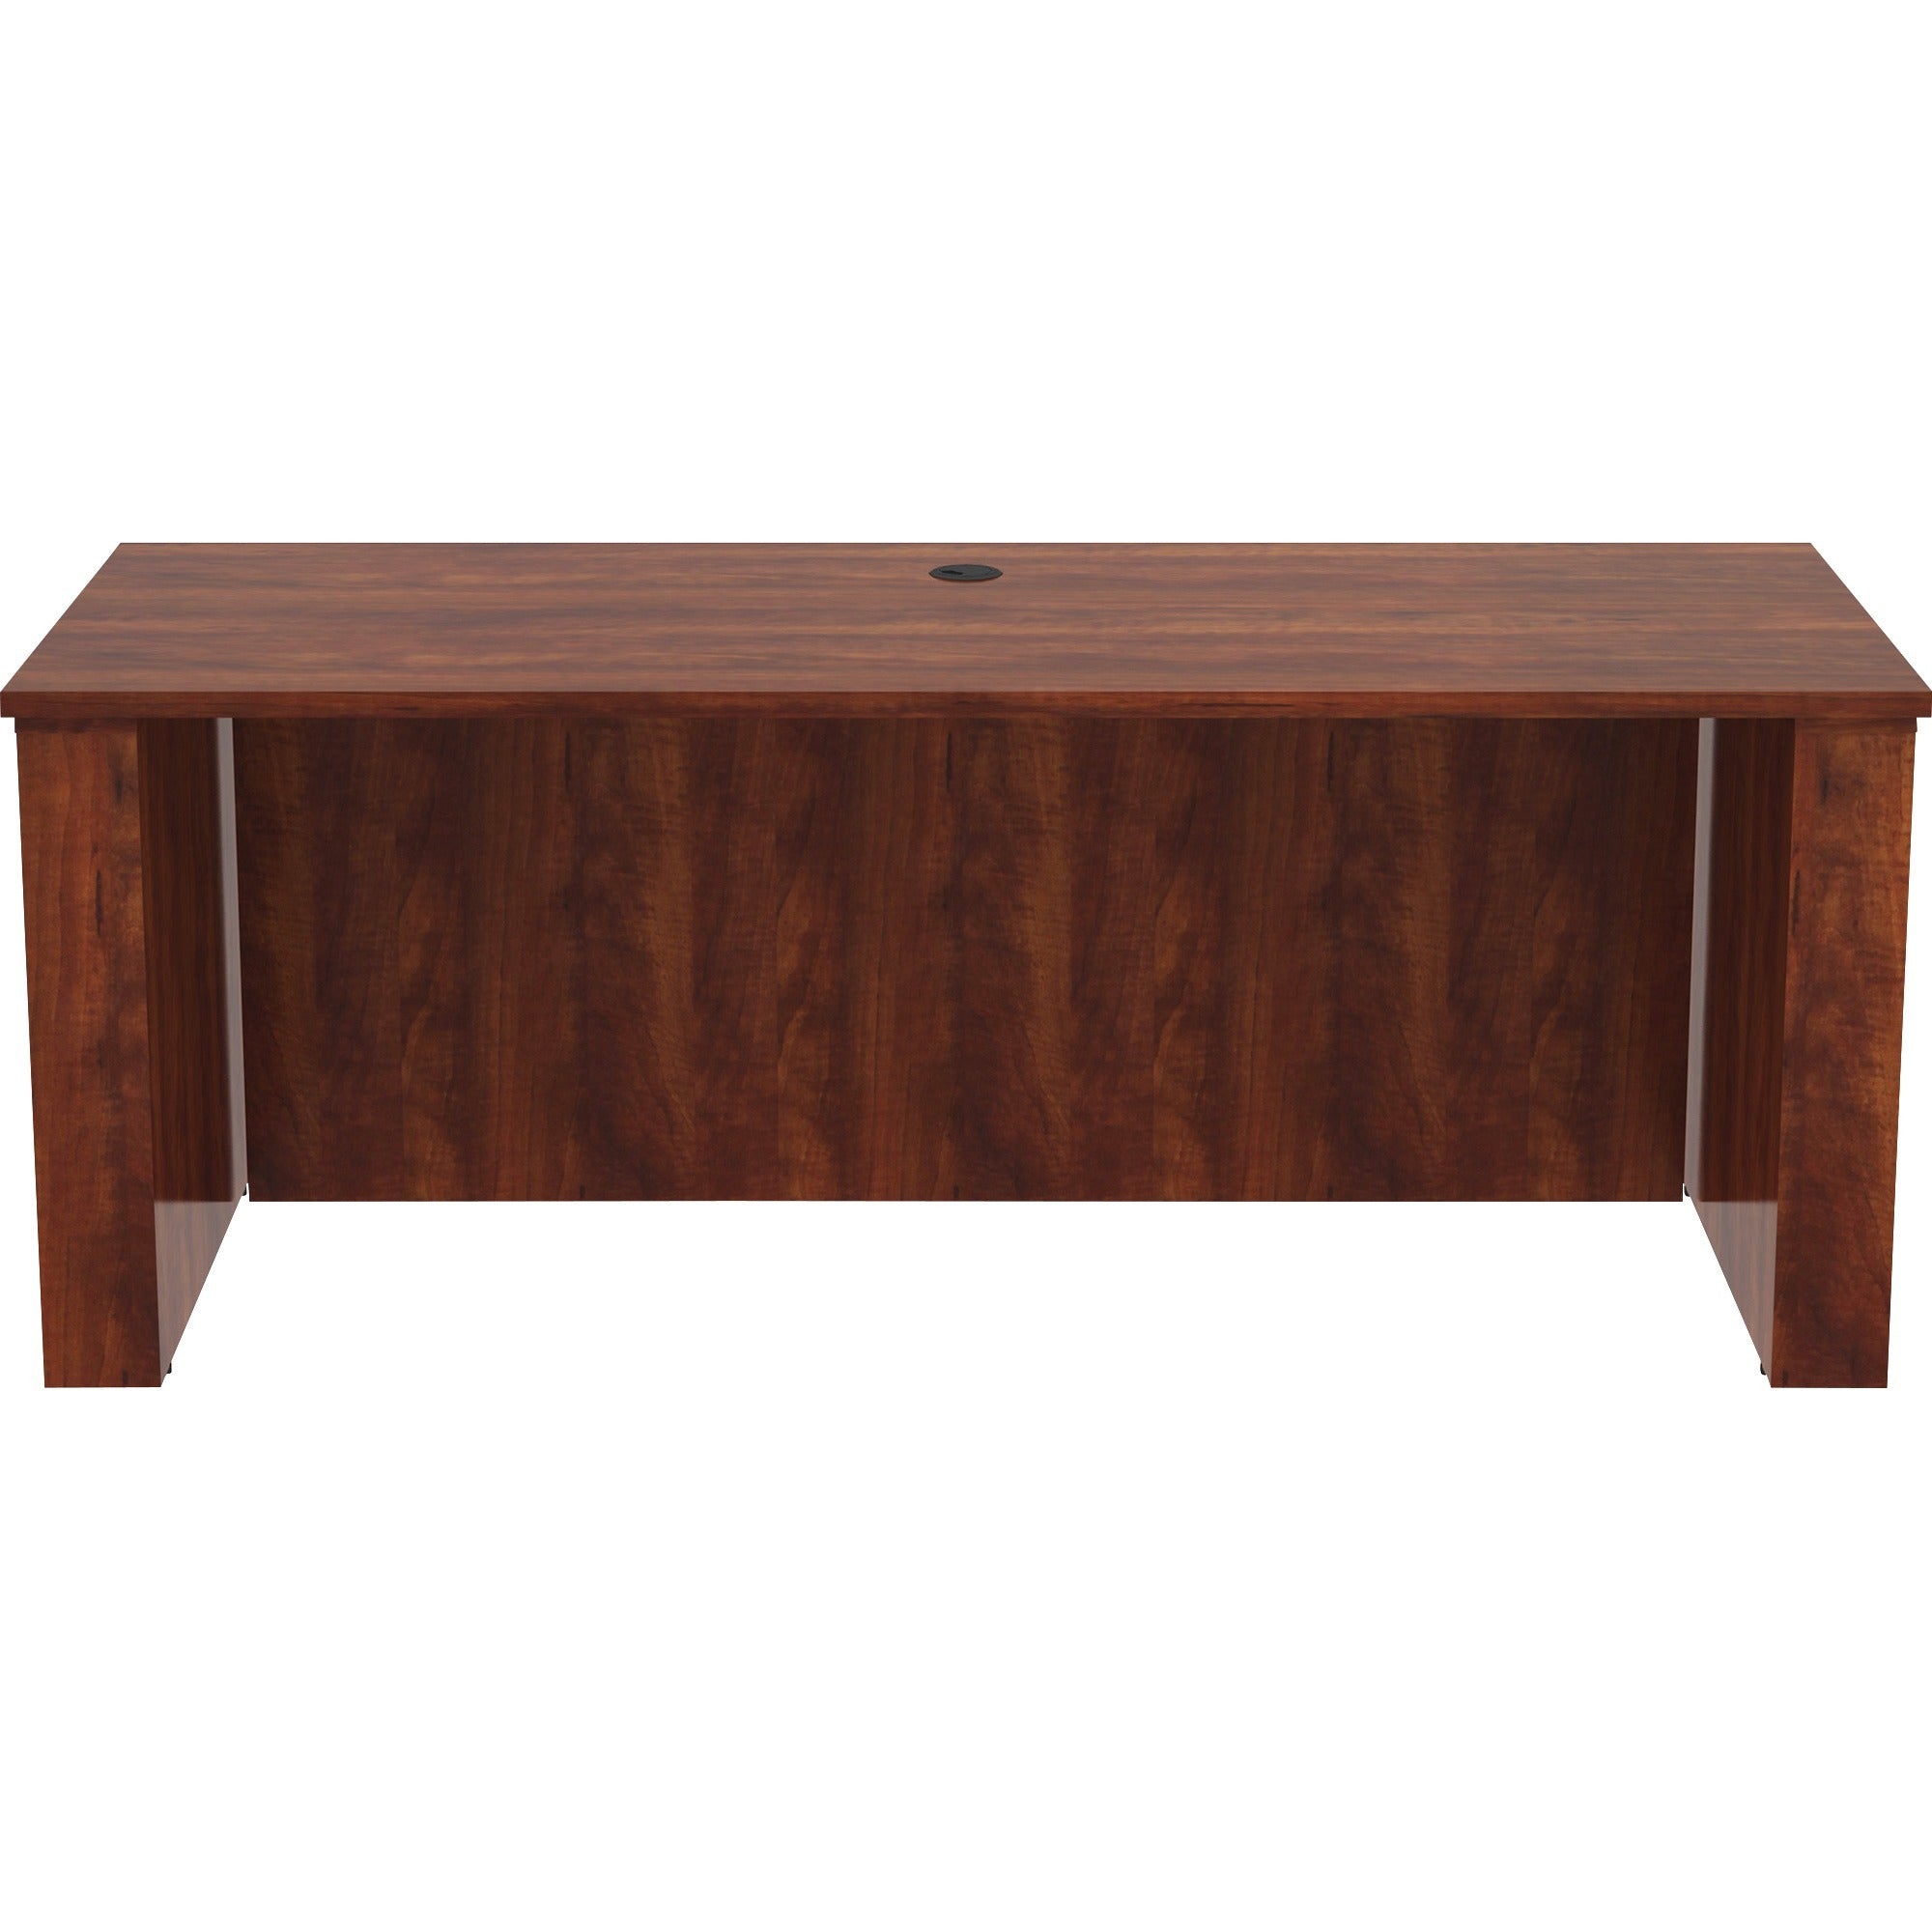 lorell-essentials-series-sit-to-stand-desk-shell-01-top-1-edge-72-x-2949-finish-cherry-laminate-table-top_llr69573 - 2